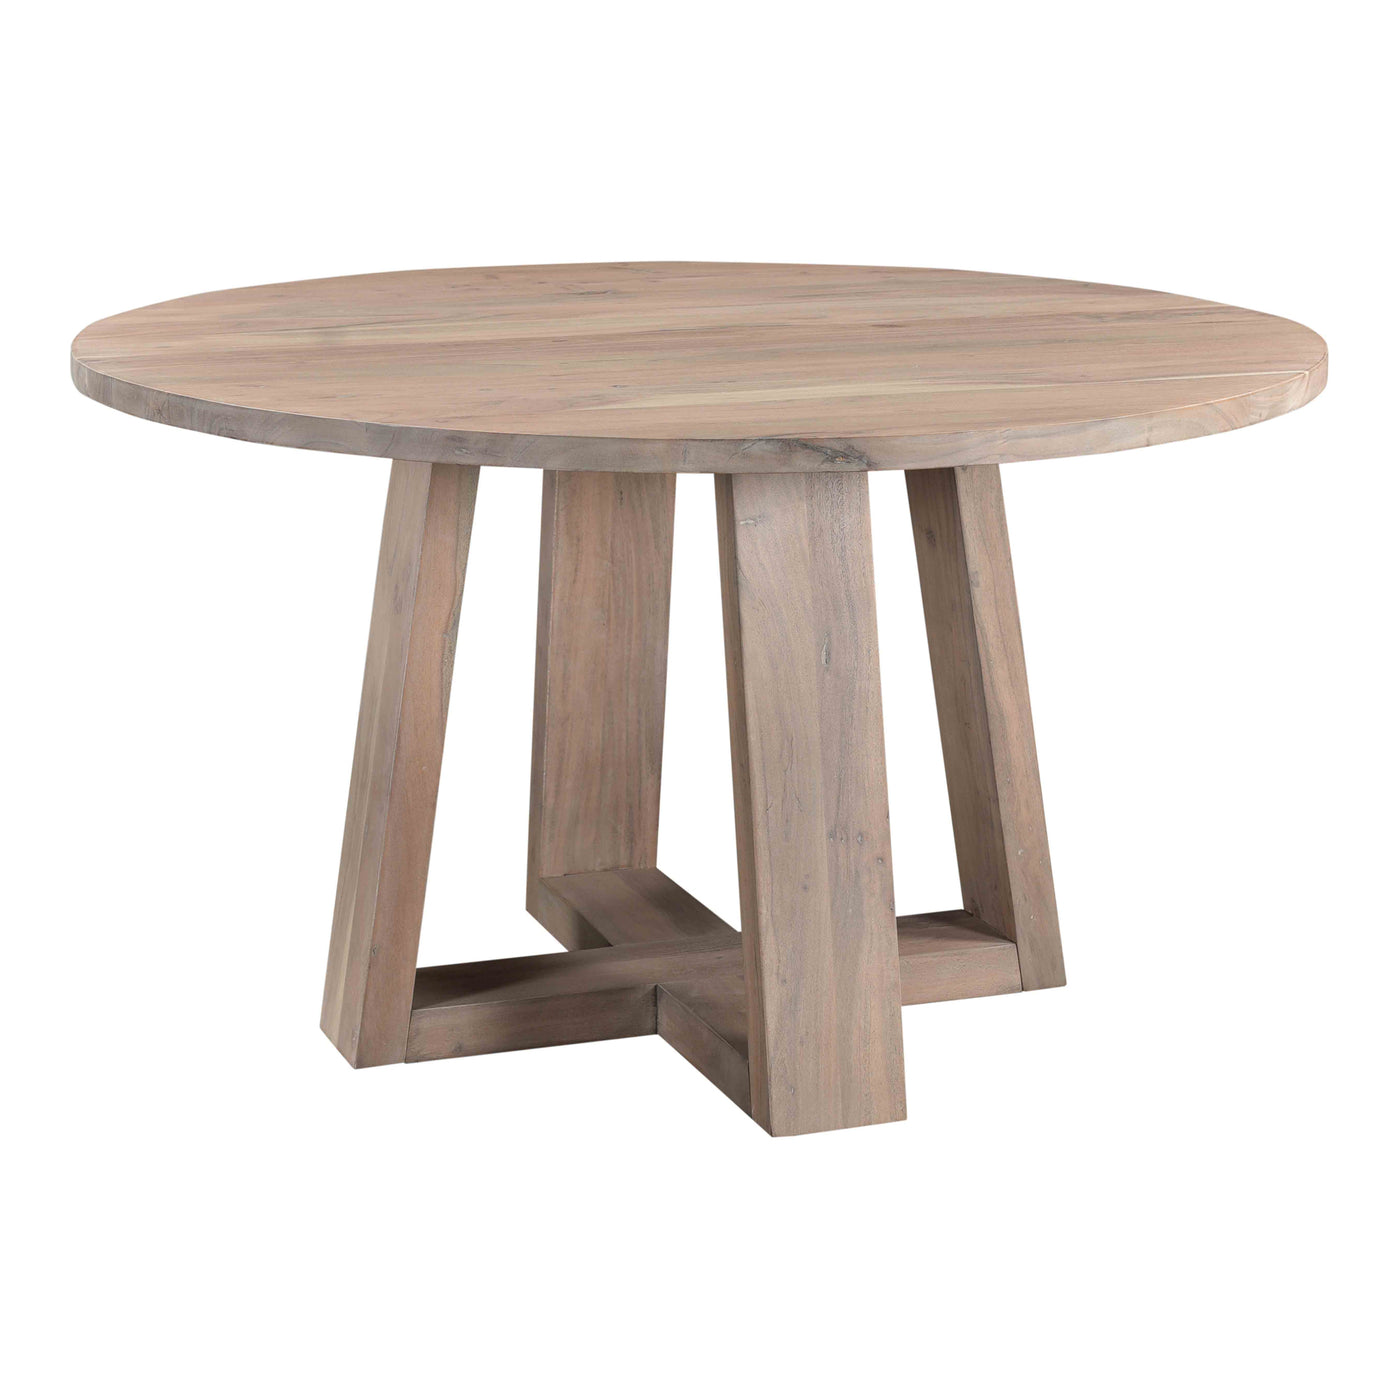 Sweetly bright in a Scandinavian whitewashed finish, the Tanya round dining table is made of solid acacia wood with an org...